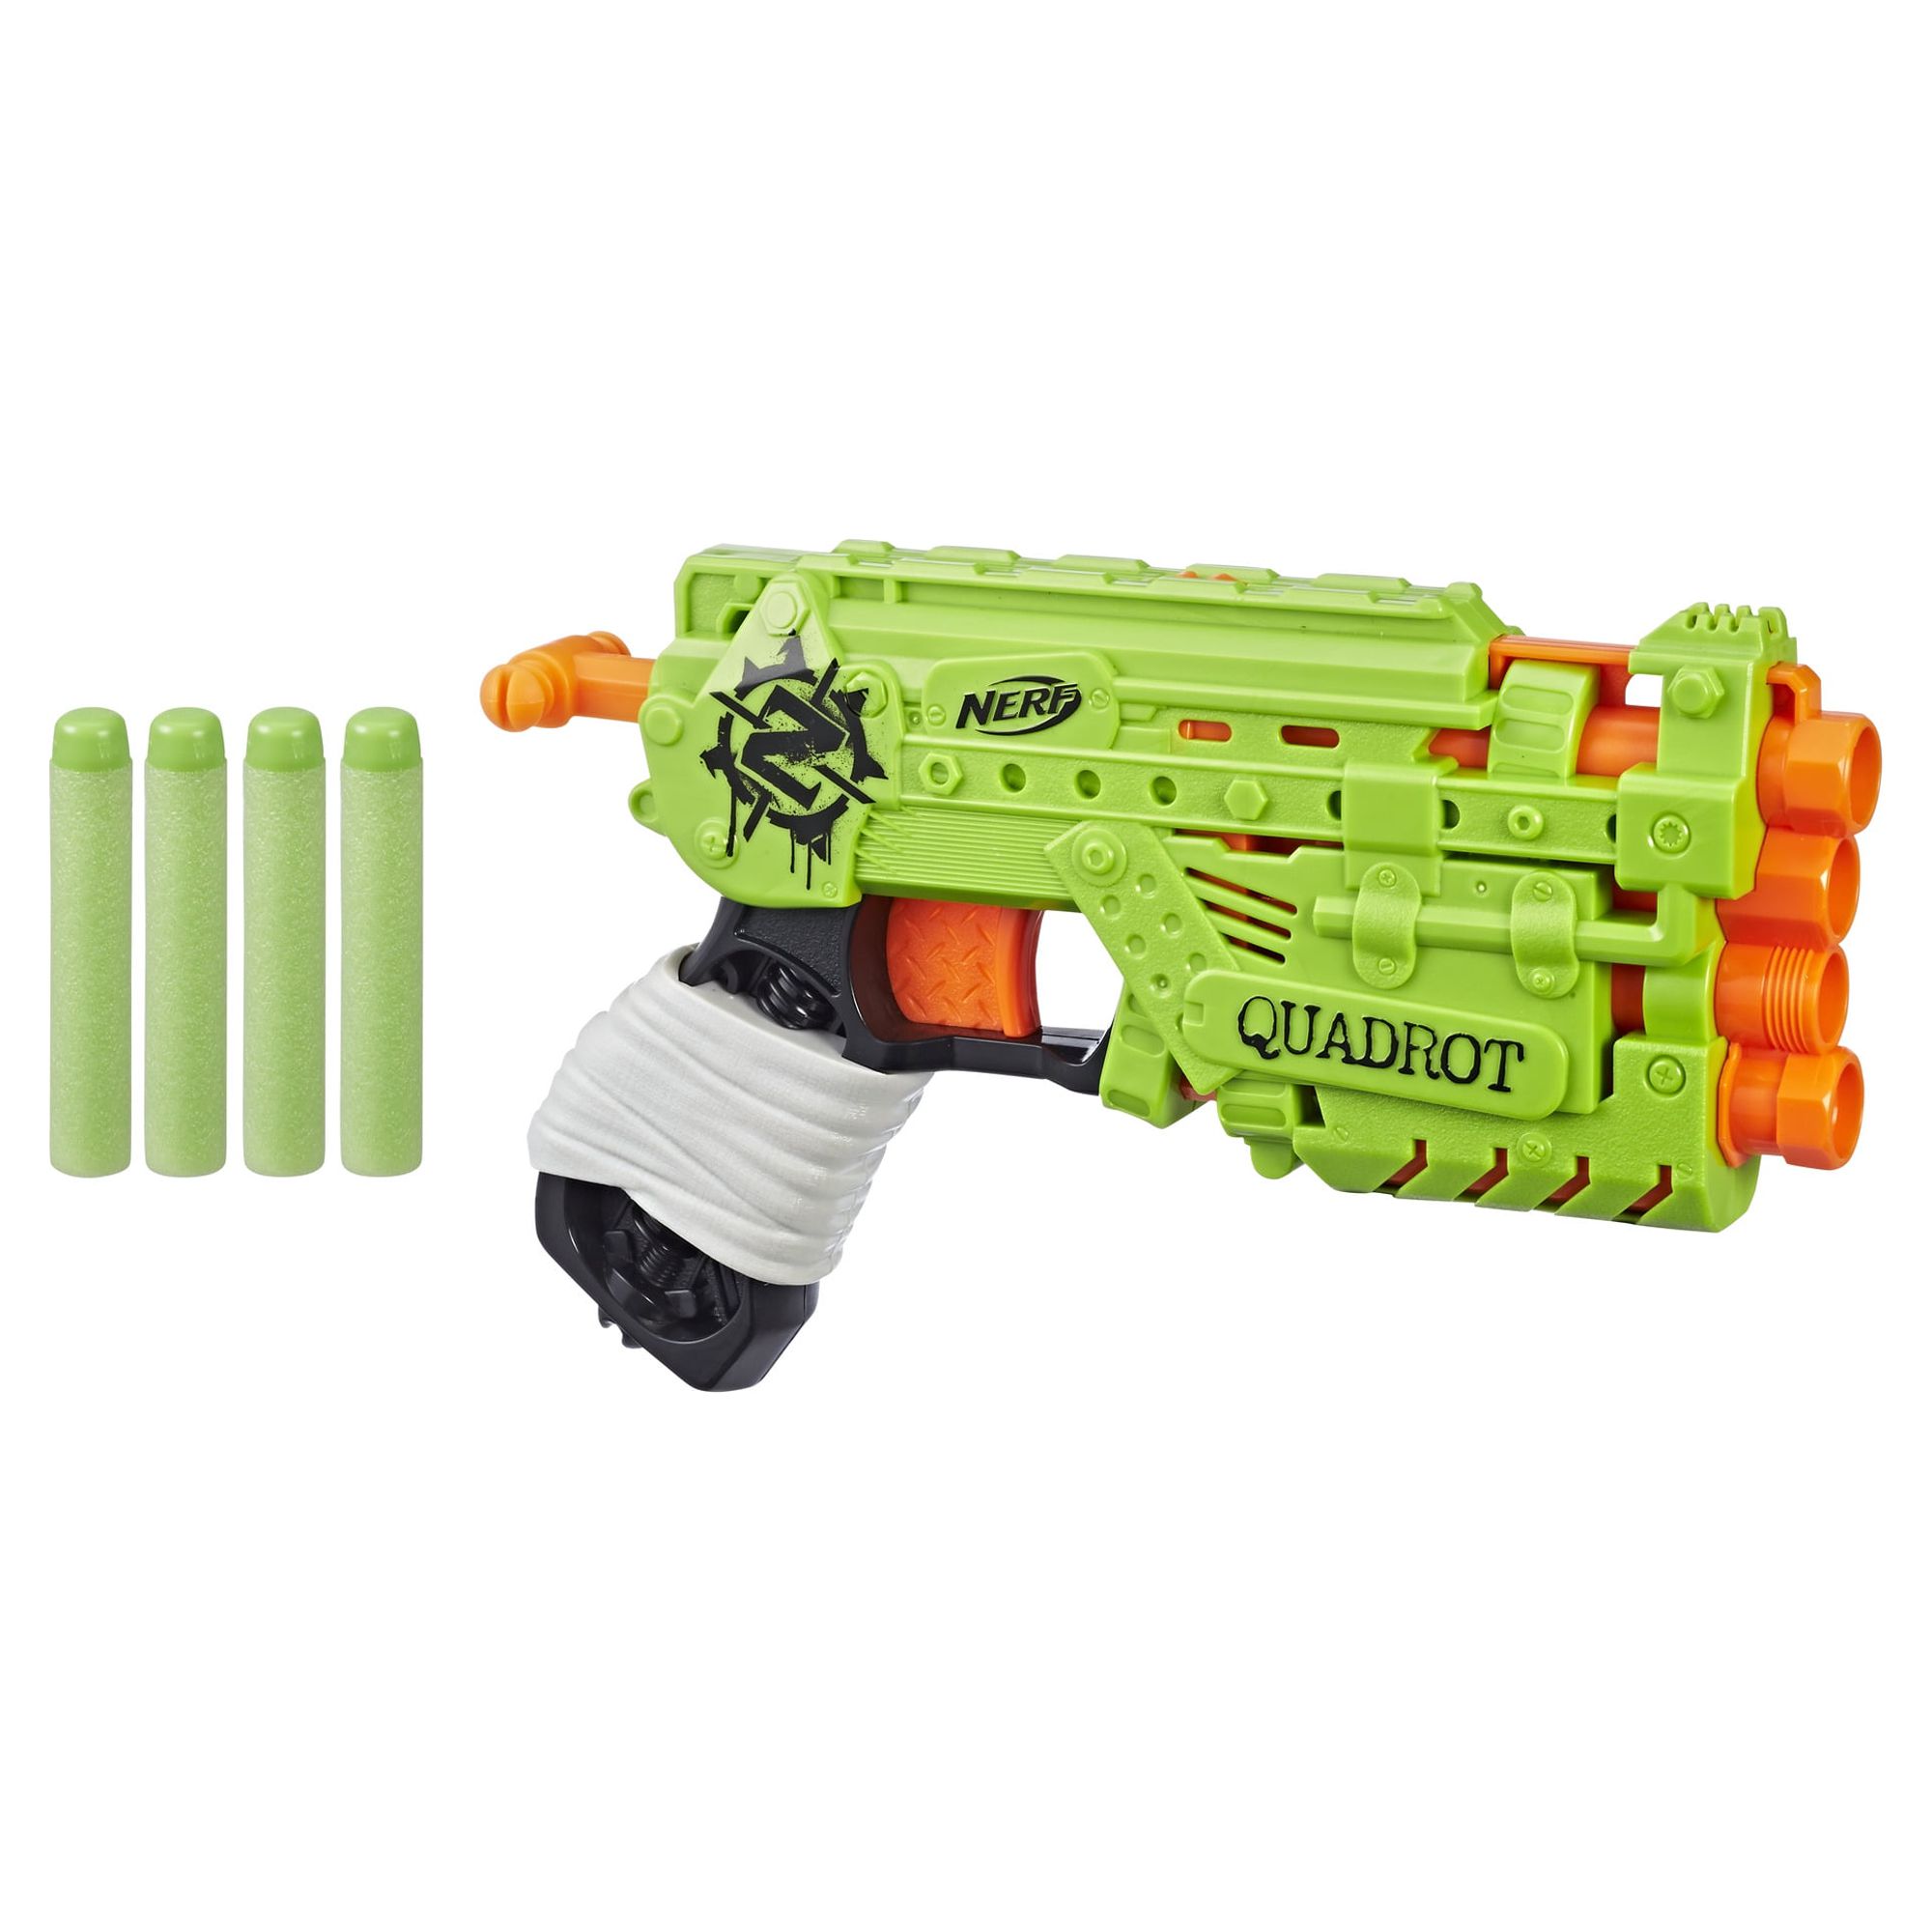 Nerf Zombie Strike Quadrot Blaster, for Kids Ages 8 and Up, Includes 4 Darts - image 1 of 8